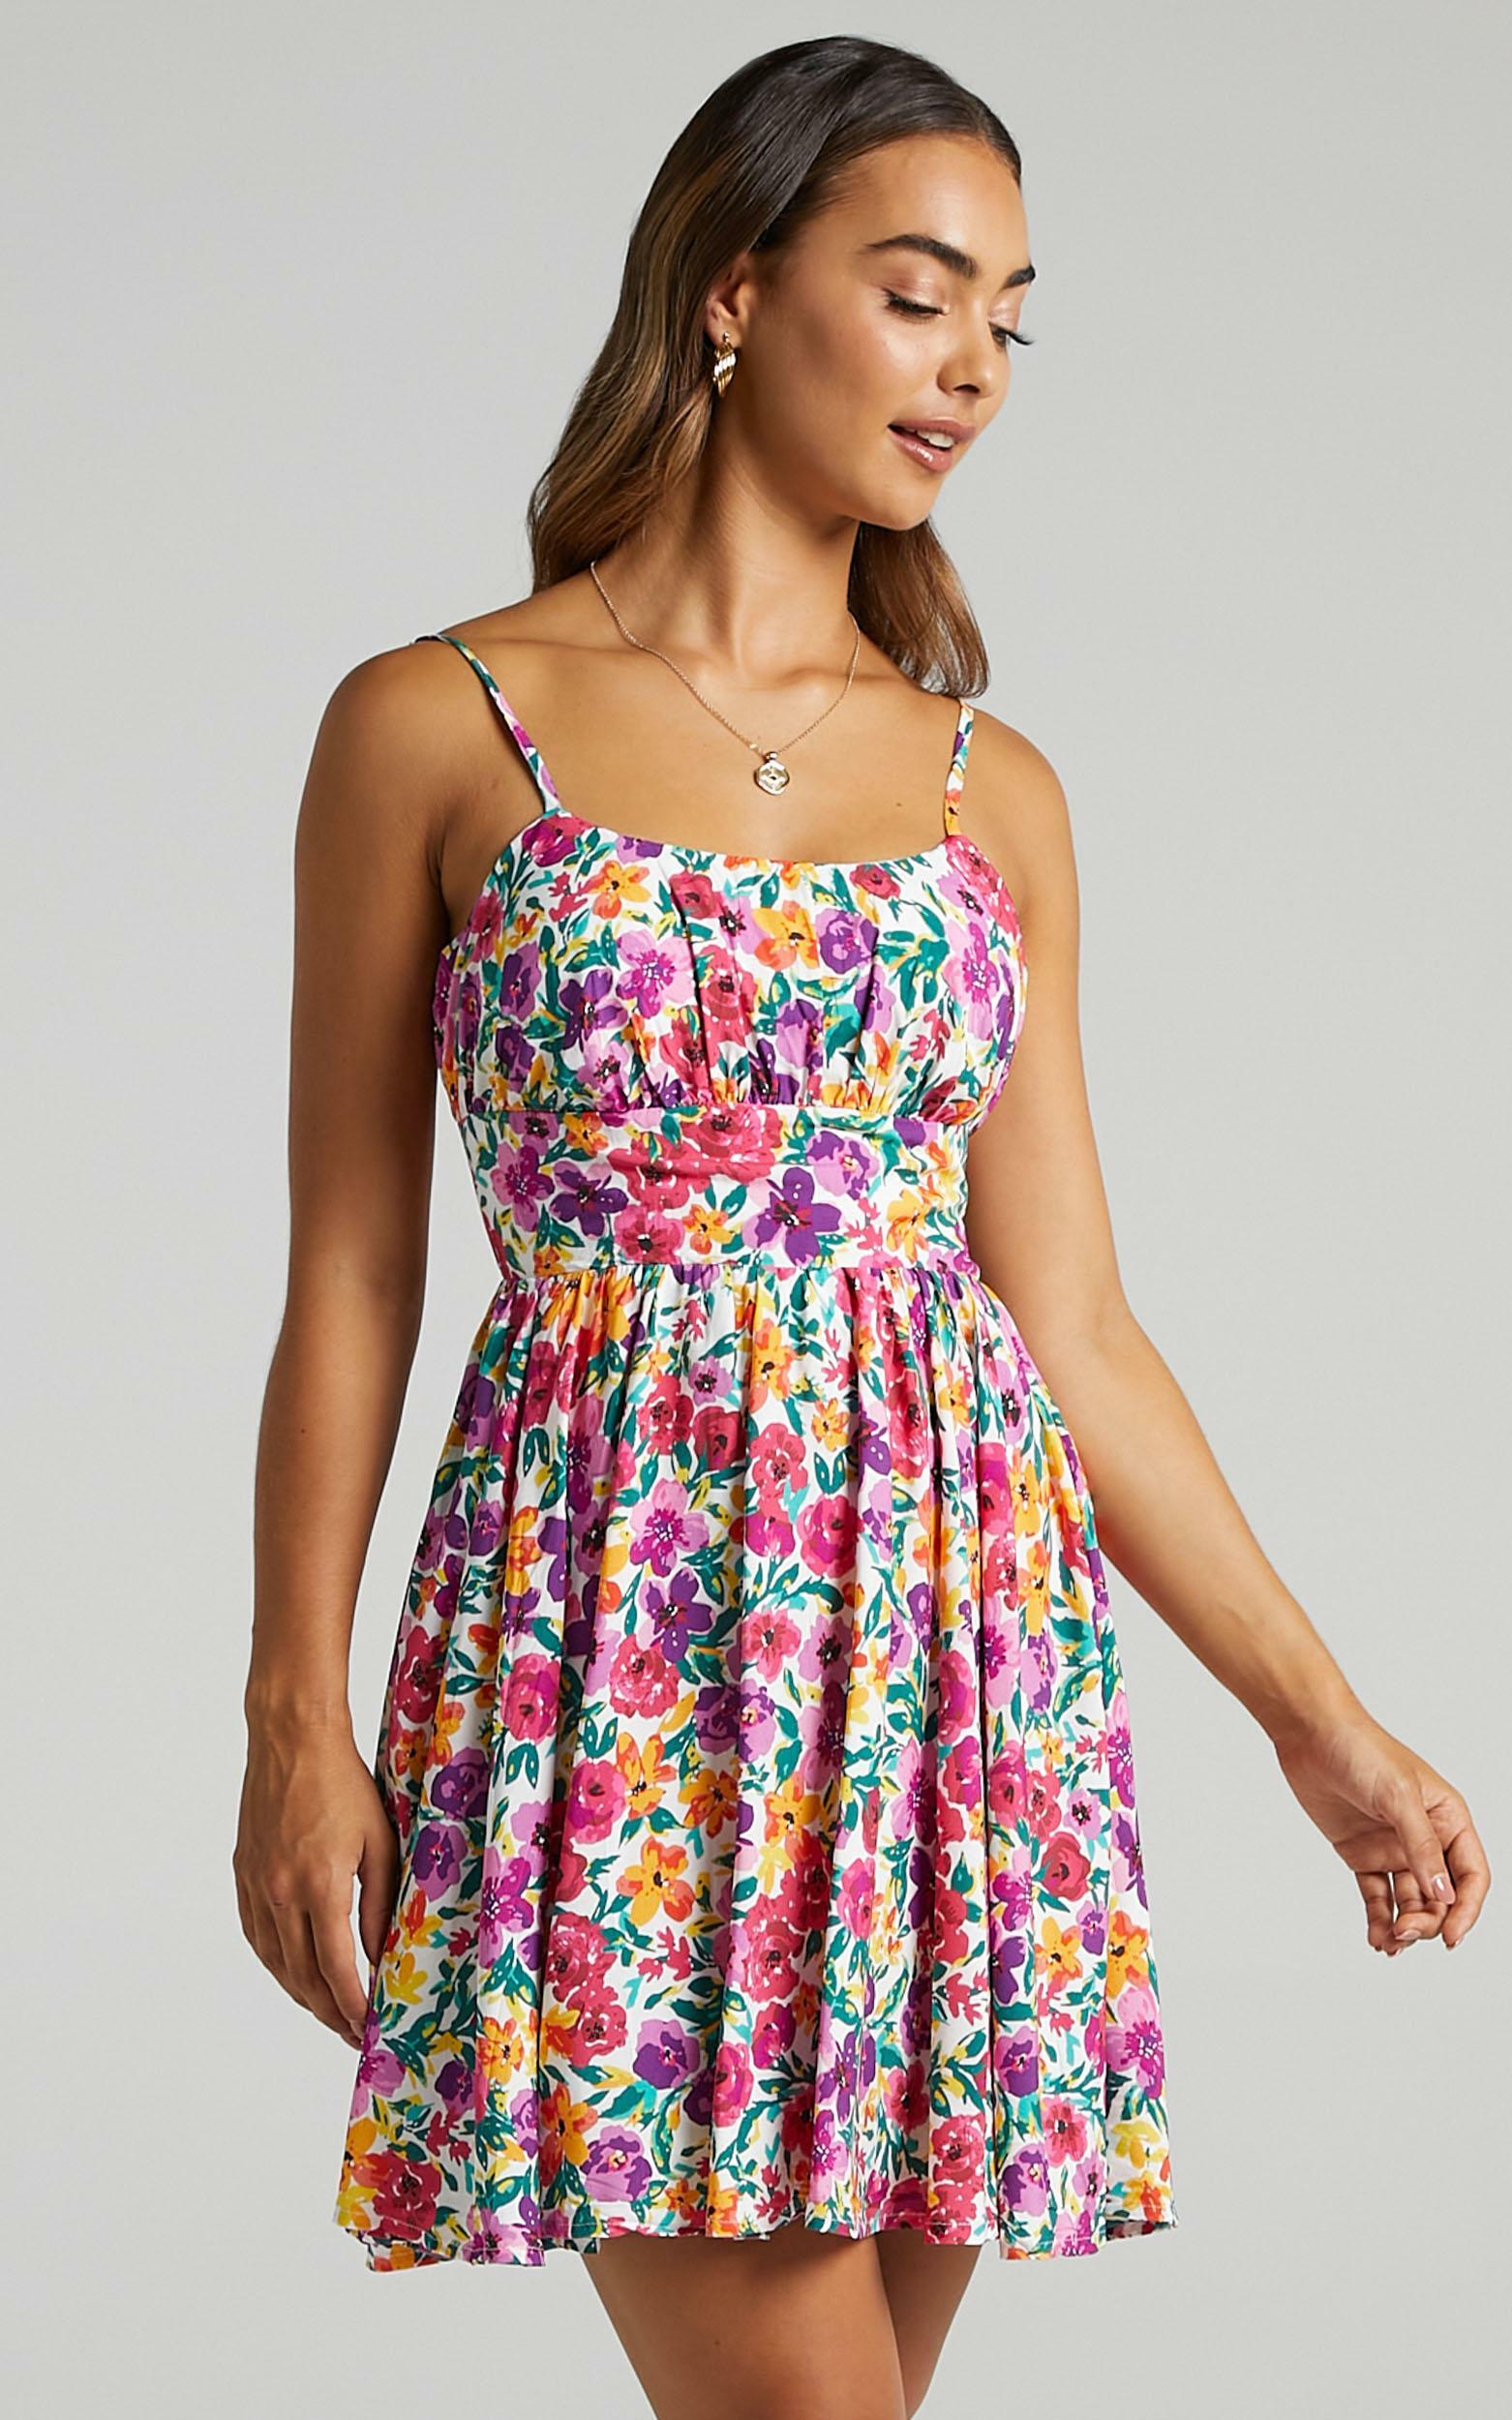 Summer Jam Sweetheart Mini Dress in Packed Floral - 06, MLT4, hi-res image number null